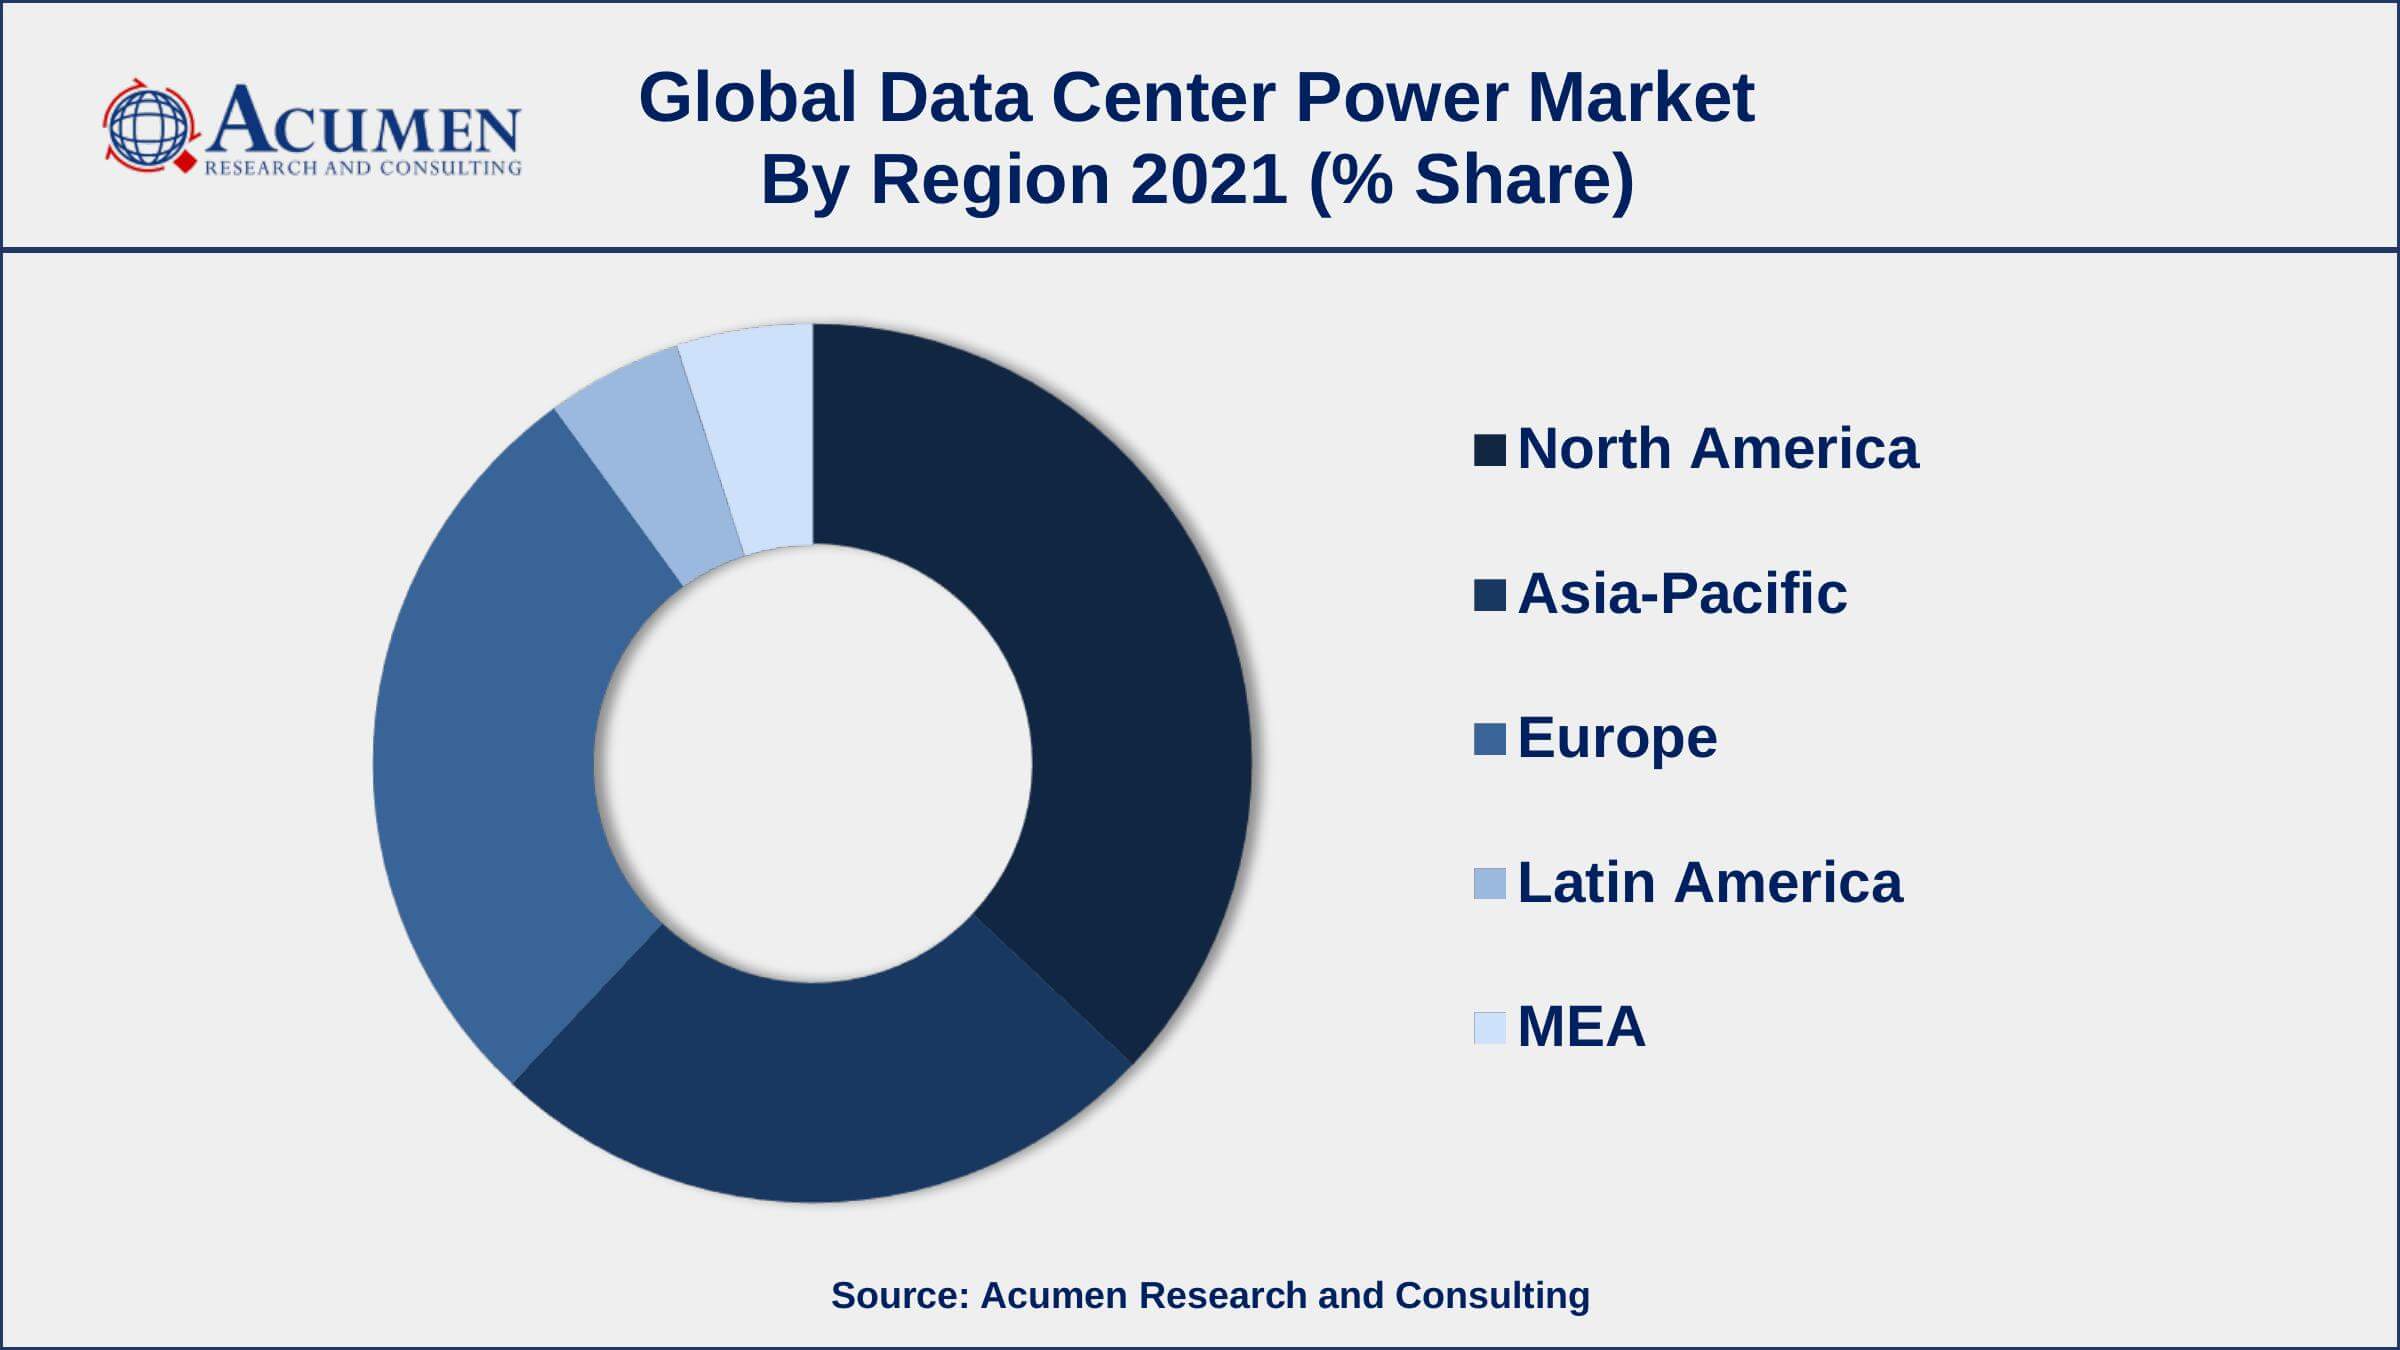 Widespread adoption of cloud computing and IoT technology, drives the data center power market size